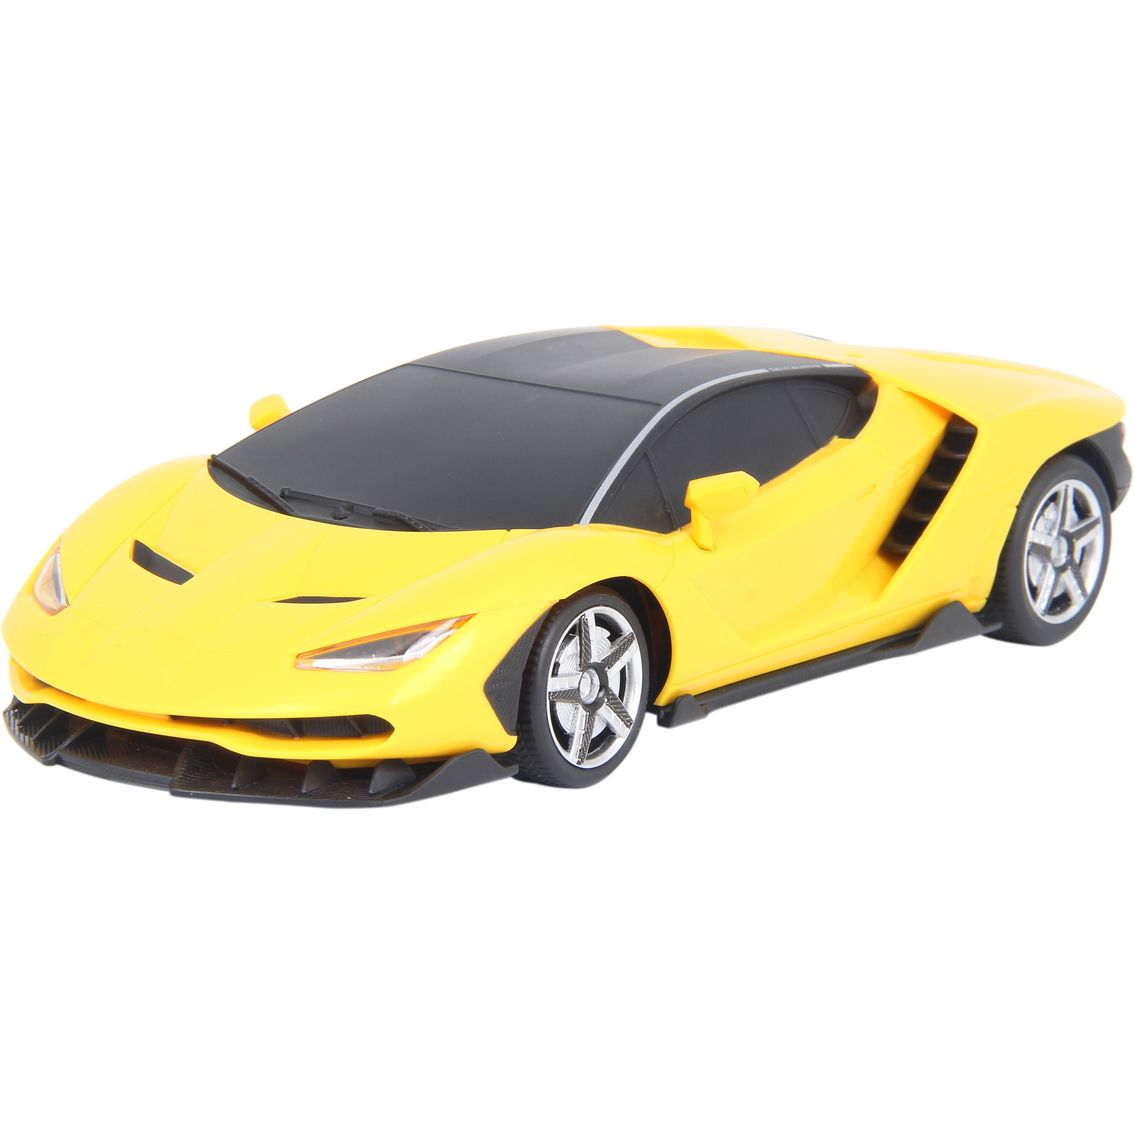 Braha 1:24 Scale Licensed RC Car - Image 5 of 10